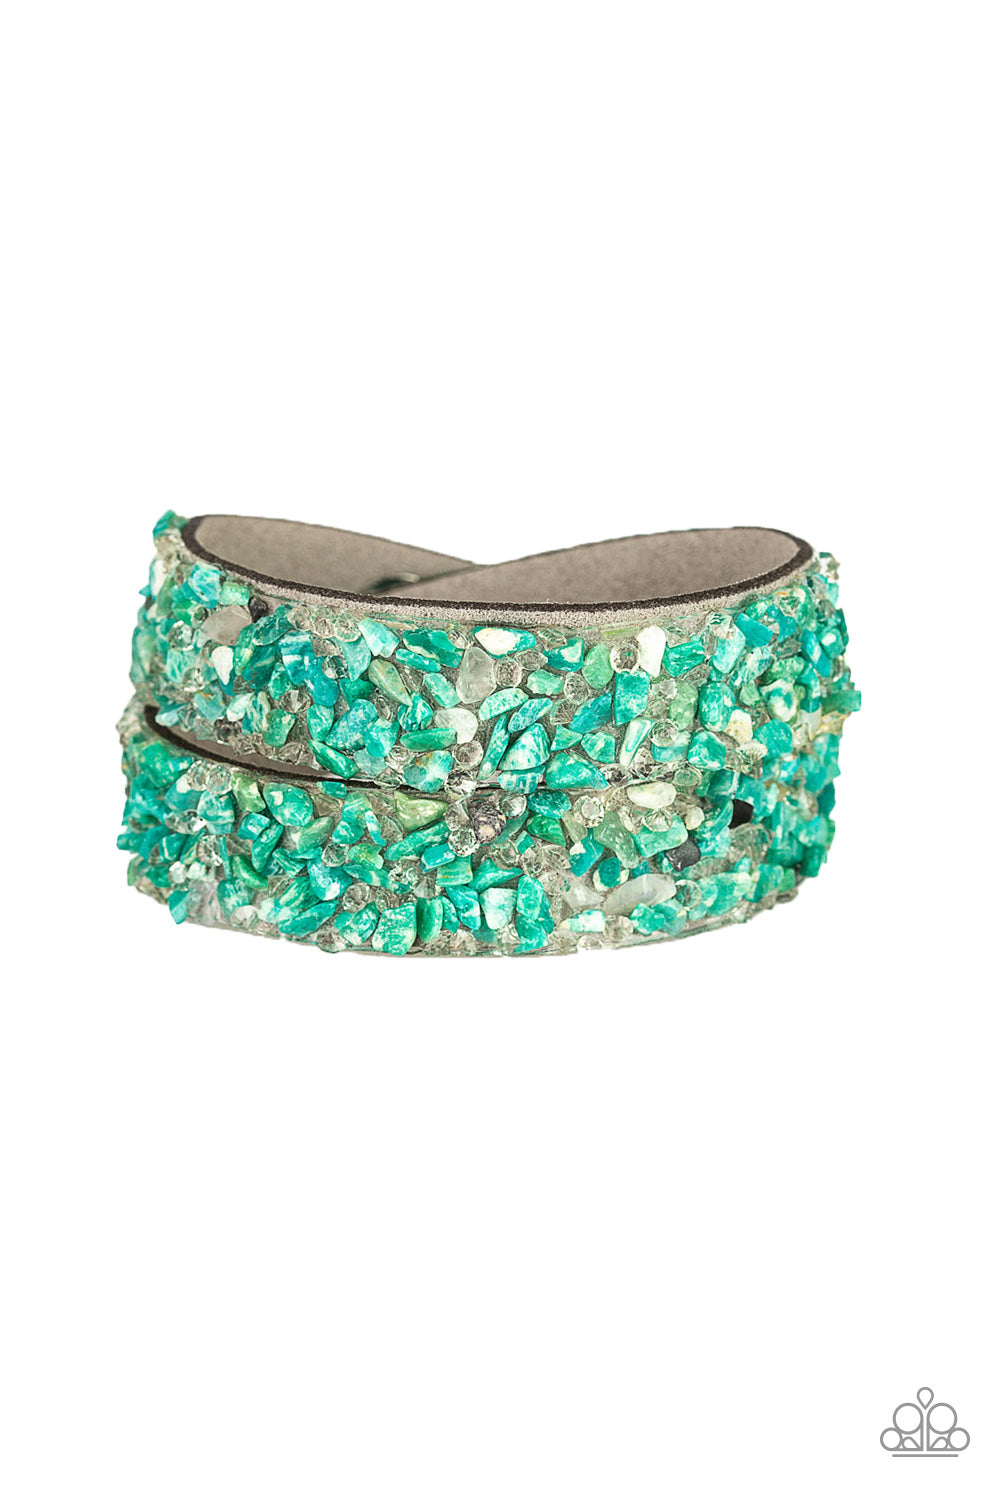 Paparazzi Accessories CRUSH To Conclusions - Green Bracelet 